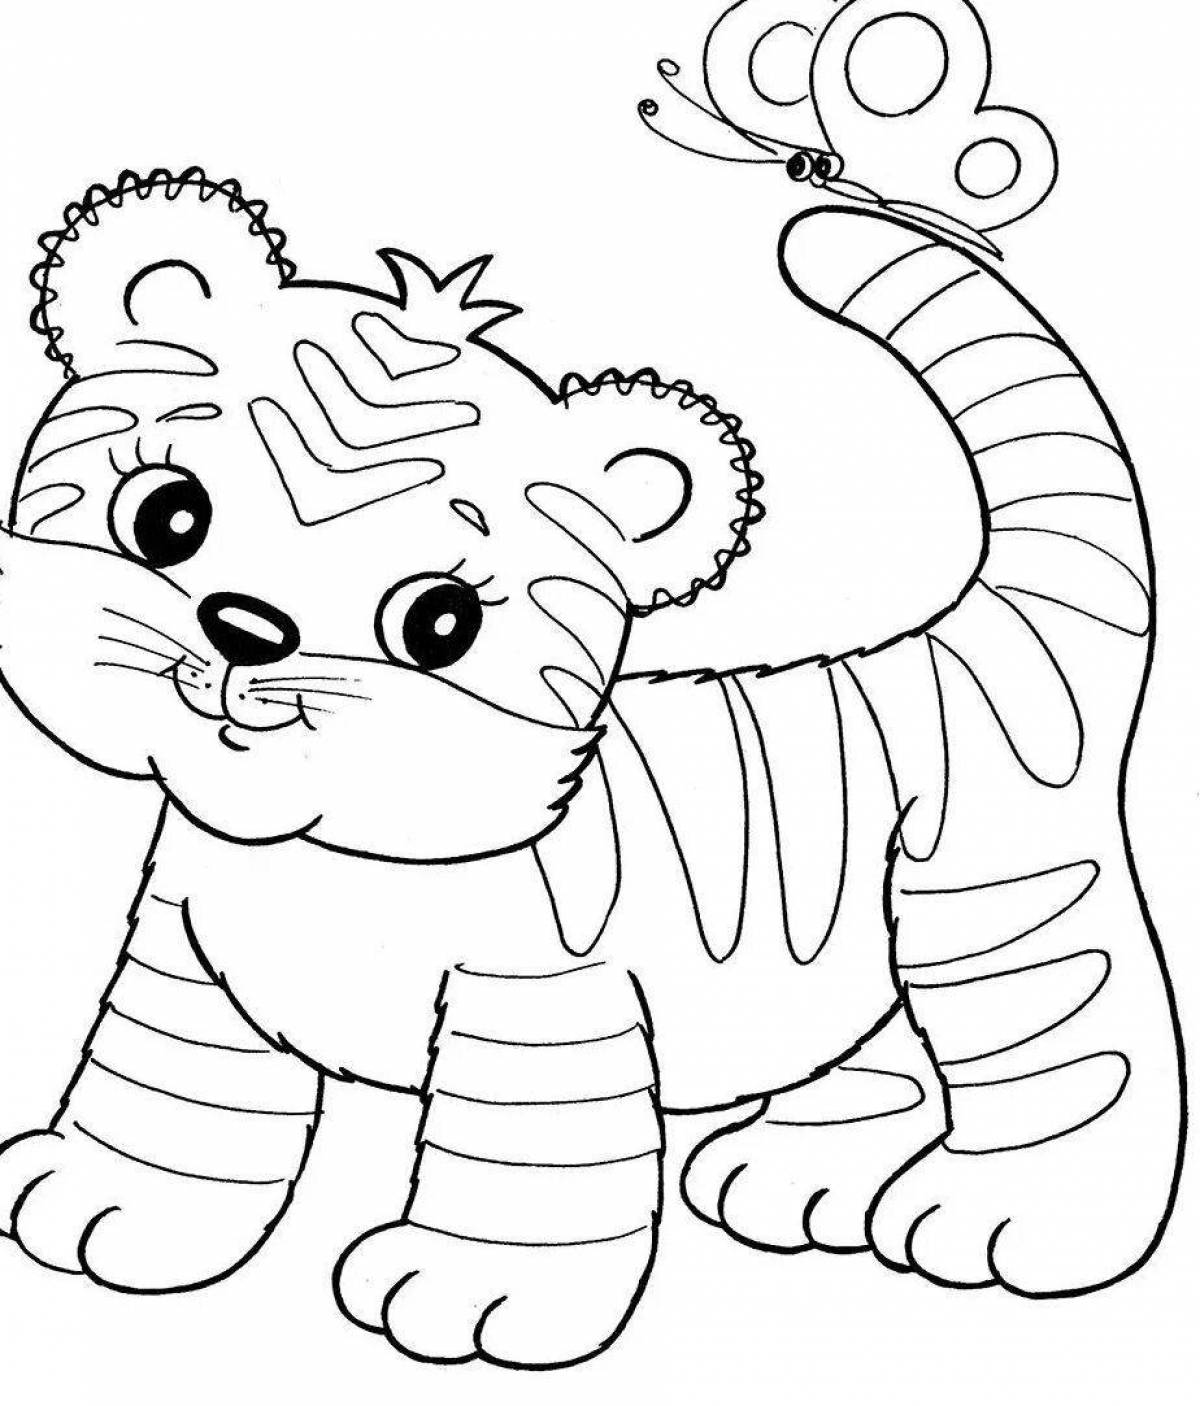 Fabulous tiger cub coloring page